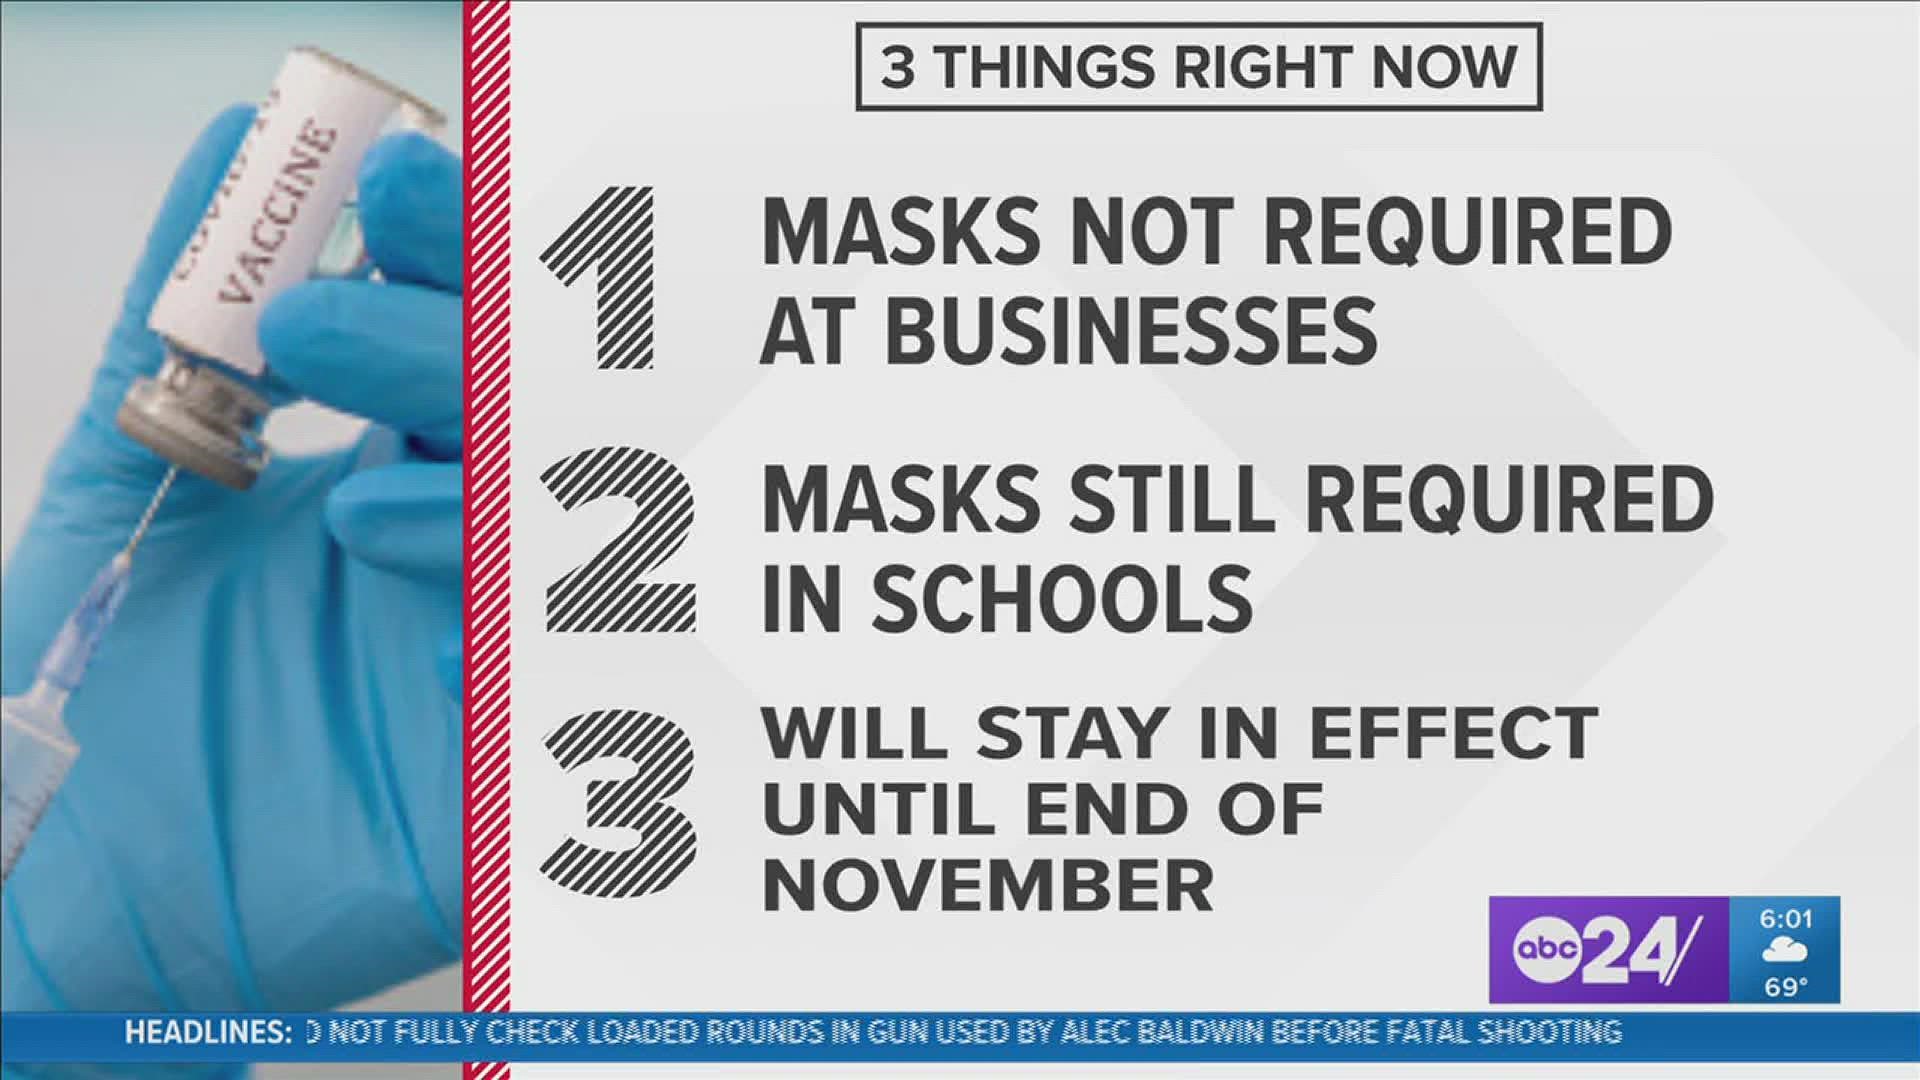 While the latest order doesn't require masks for businesses, masks are still required in schools.